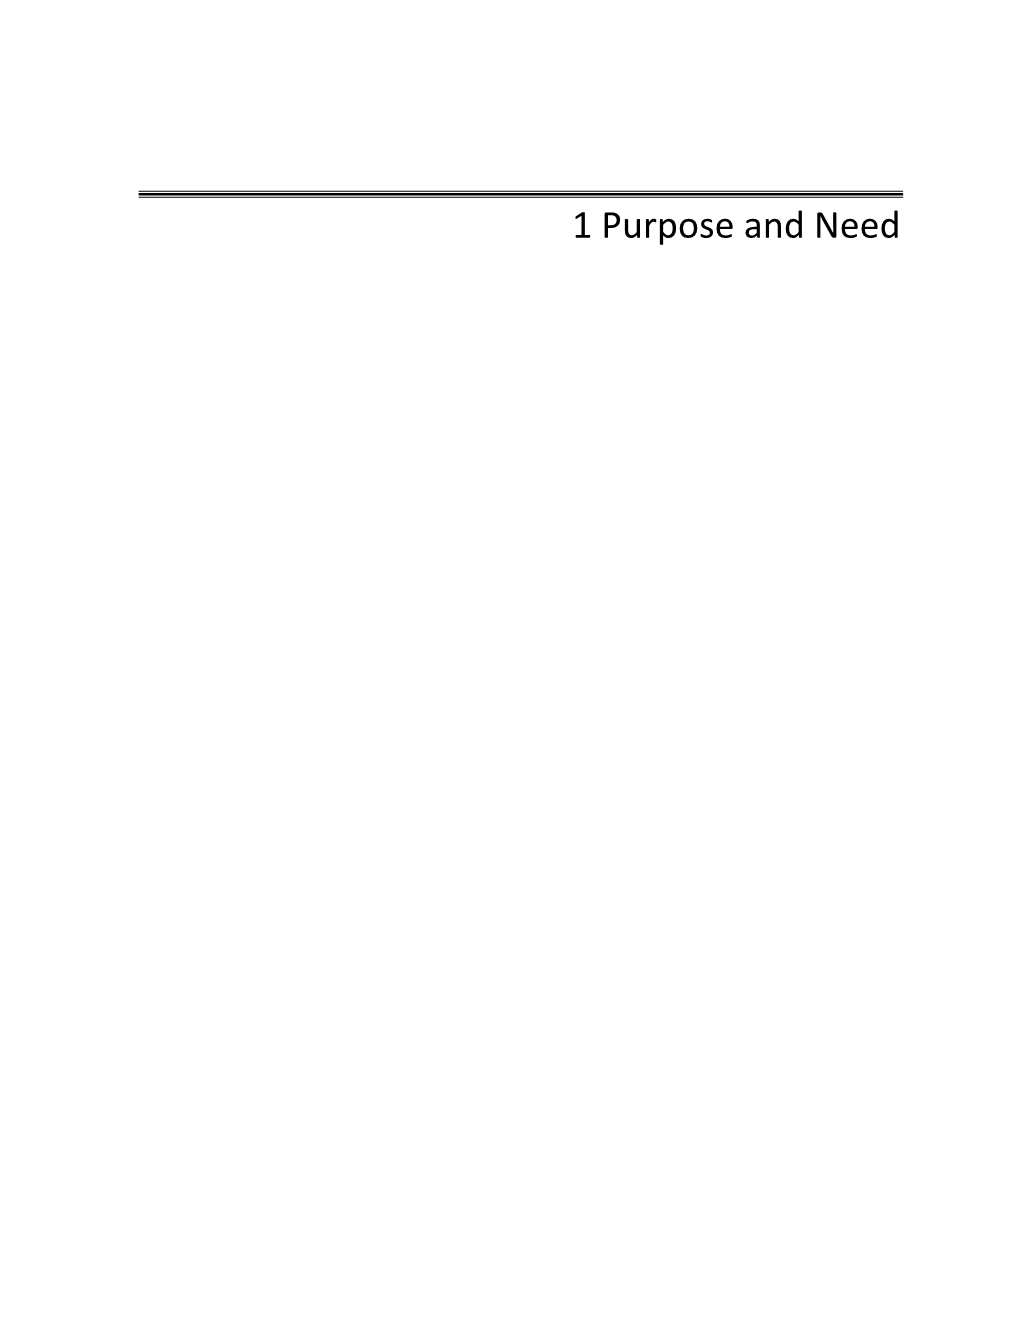 Section 1: Purpose and Need